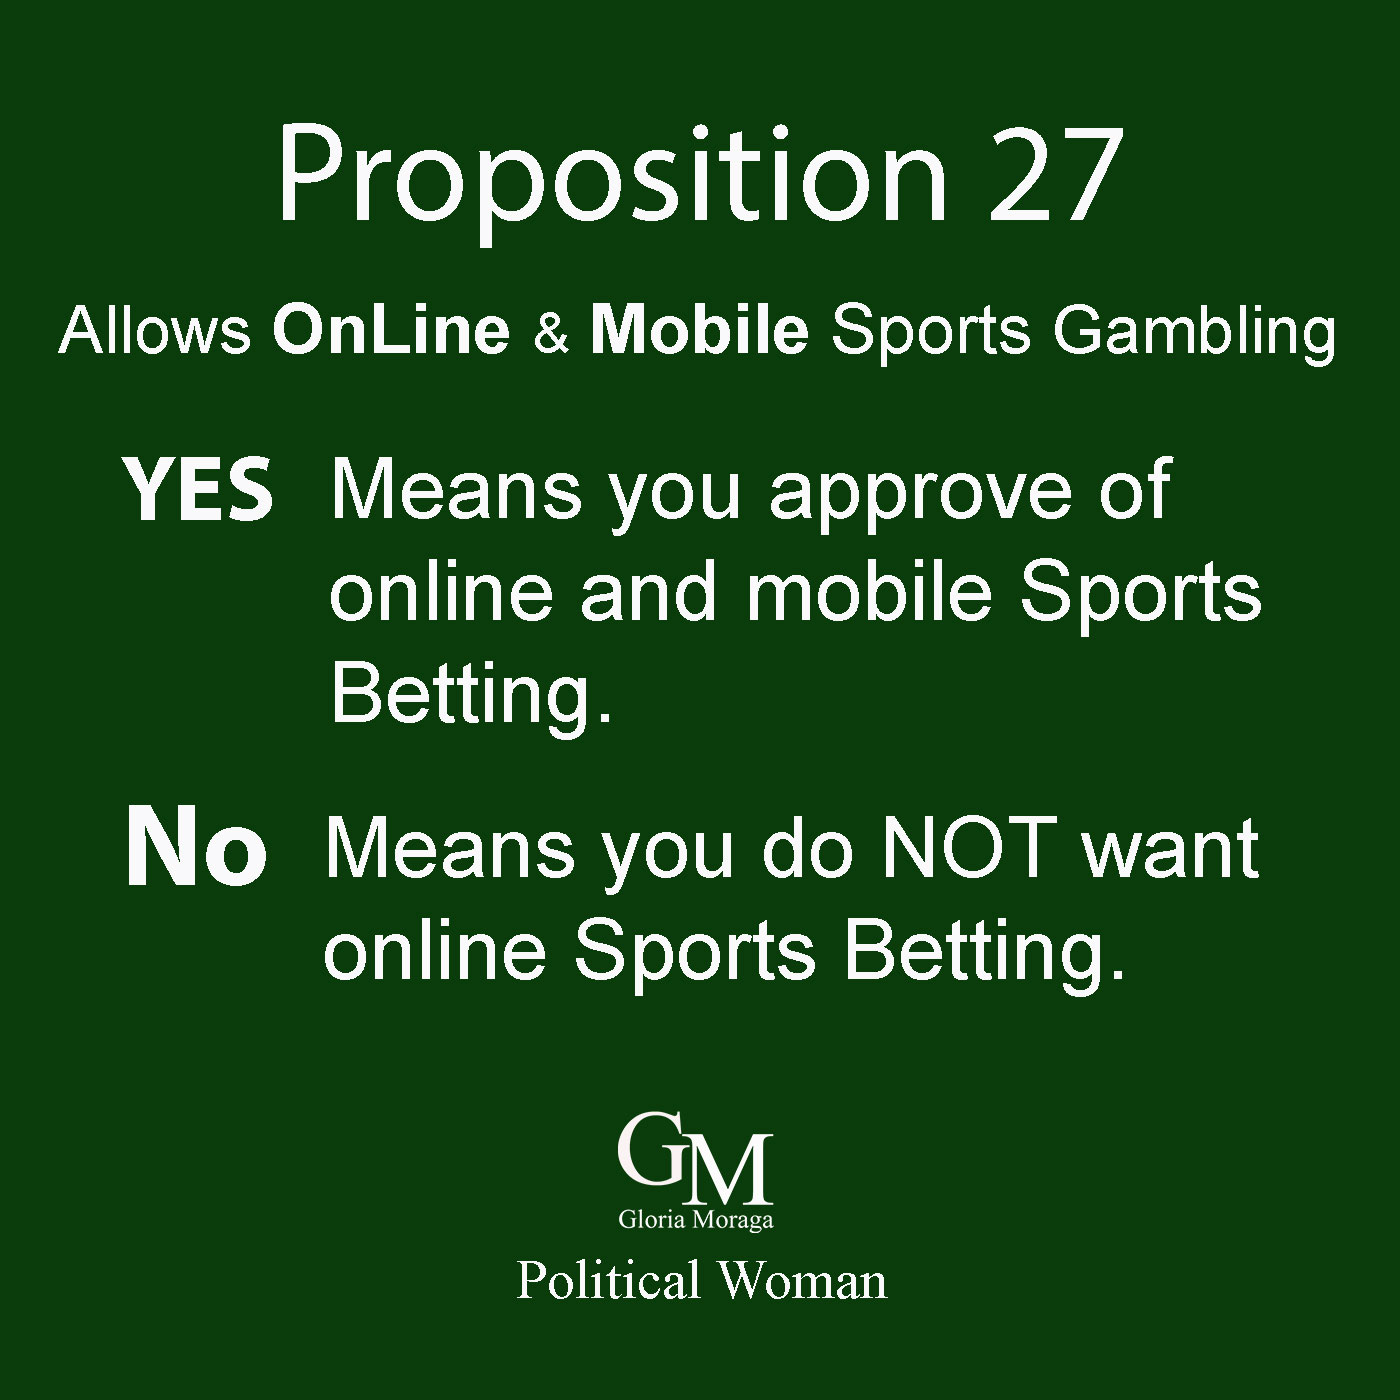 Proposition 27 Allows Online and Mobile Sports Gambling